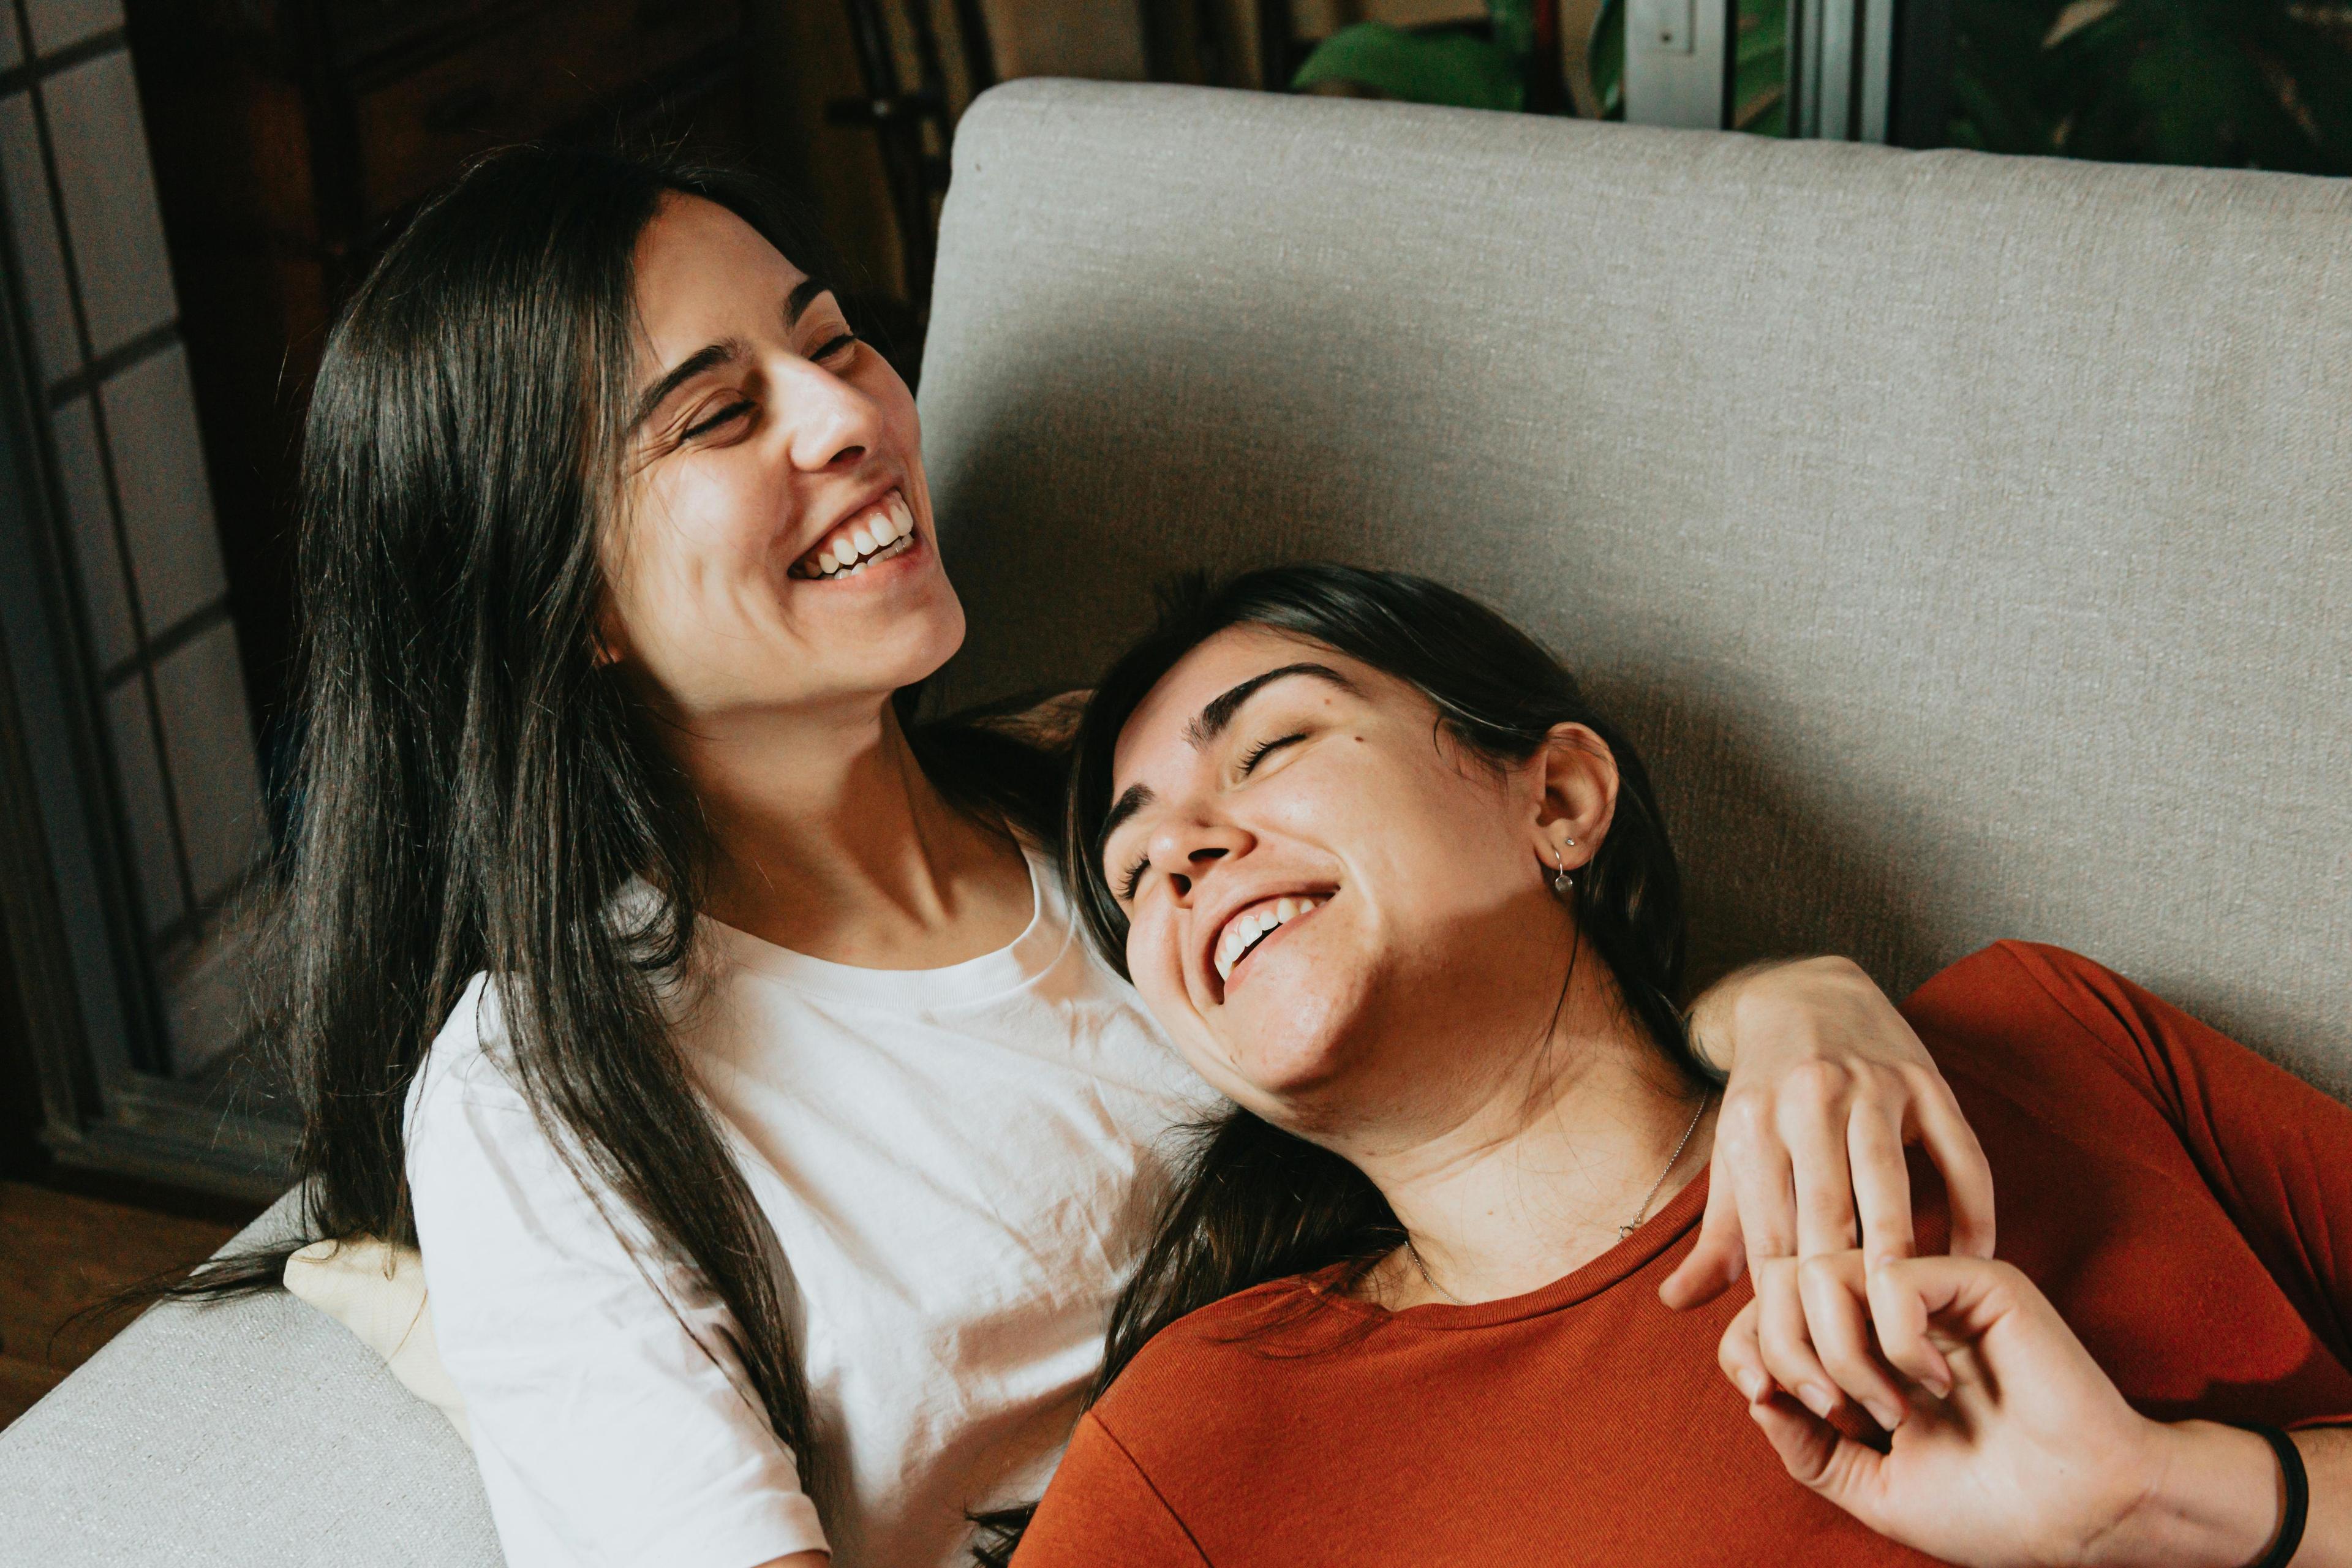 Two women laughing abut different stages of relationships, lying on a couch together, sharing a moment of comfort and companionship